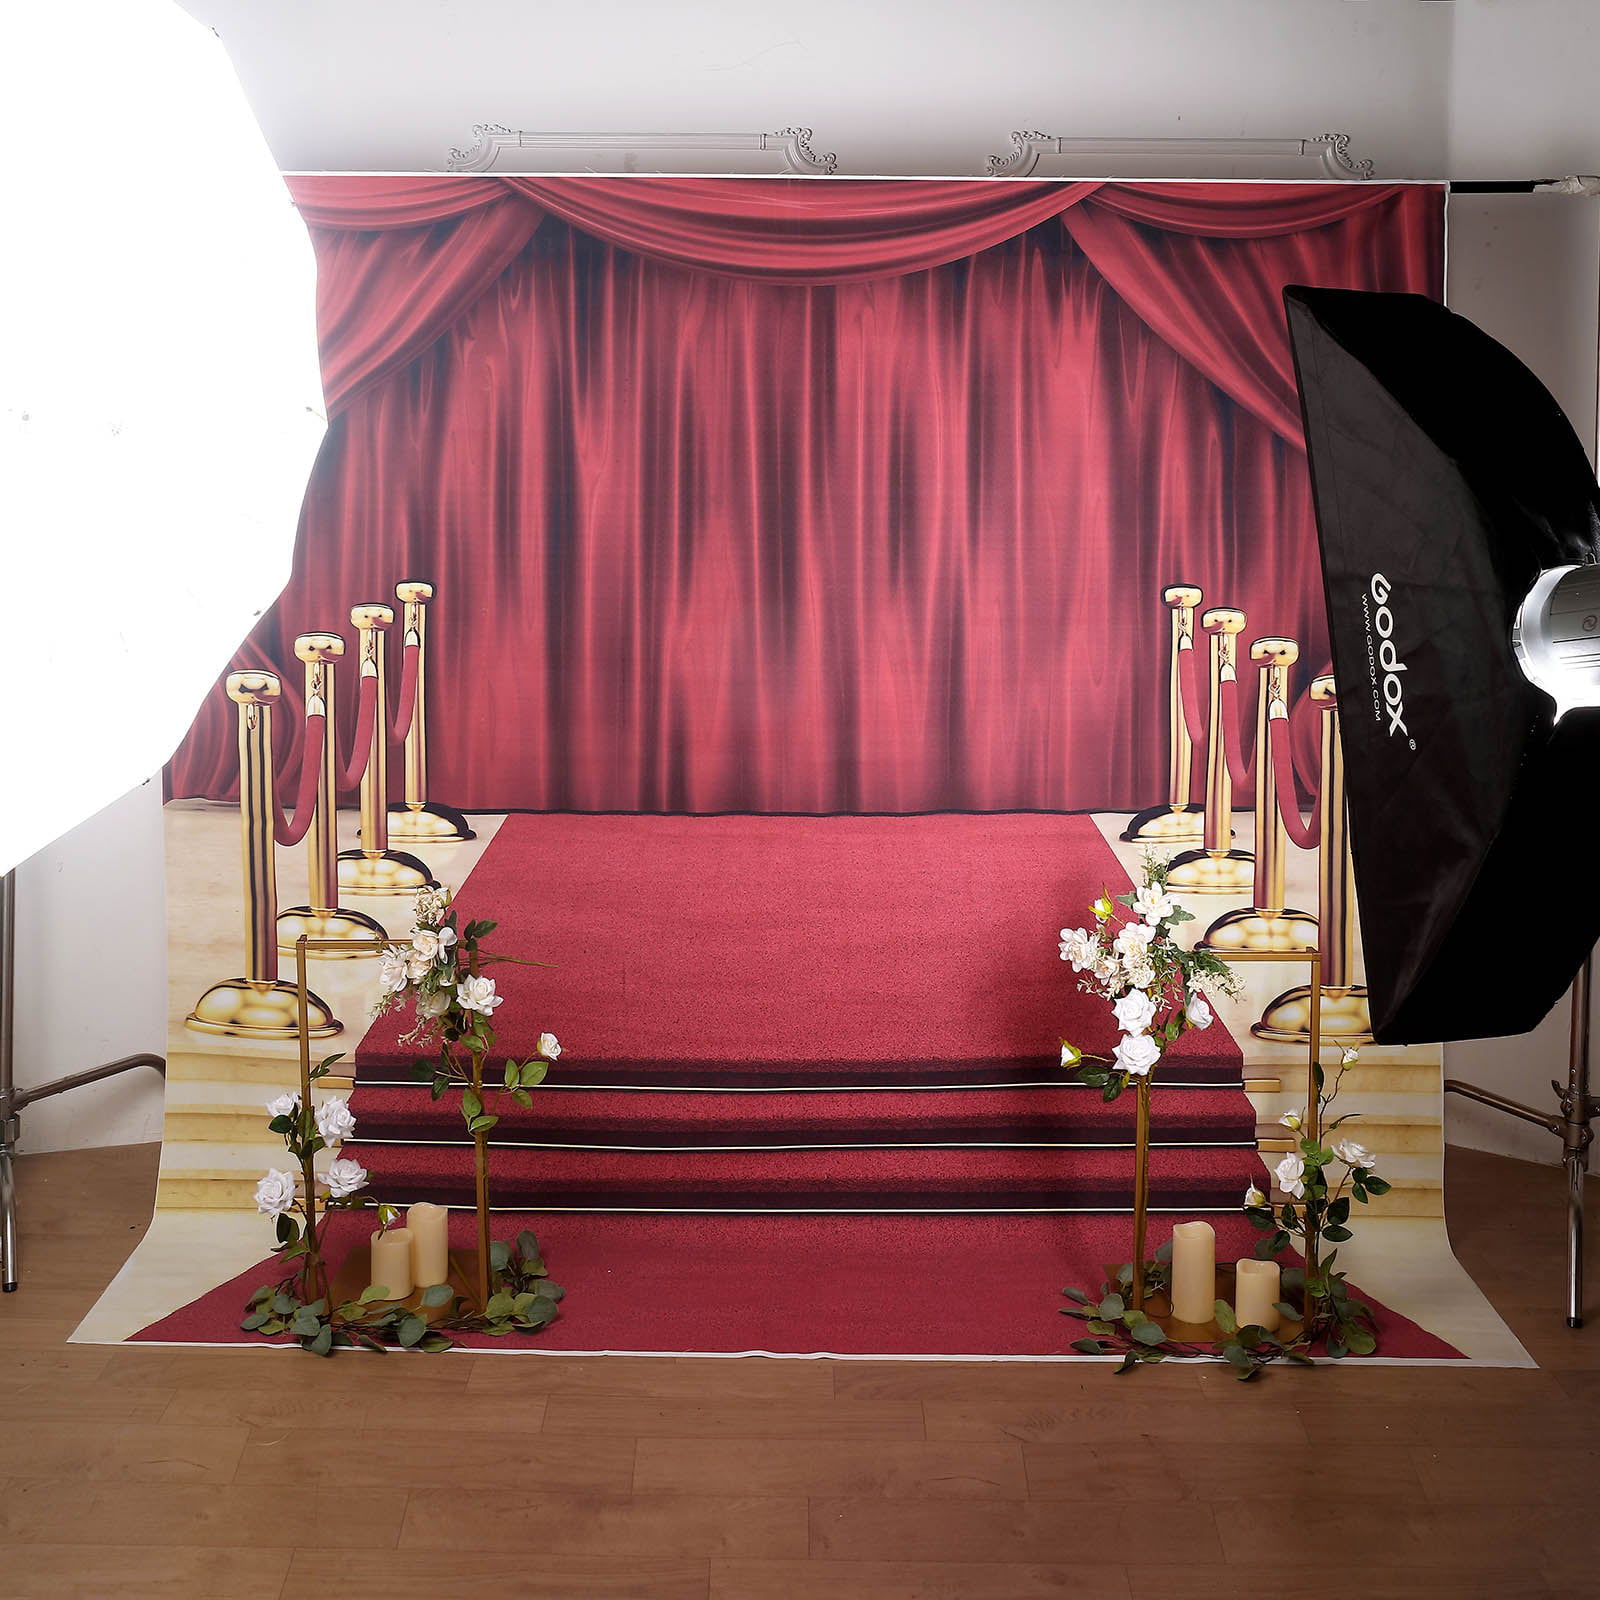 Red Carpet Hollywood Theme Party Decorations Photo Backdrops DBD-19434